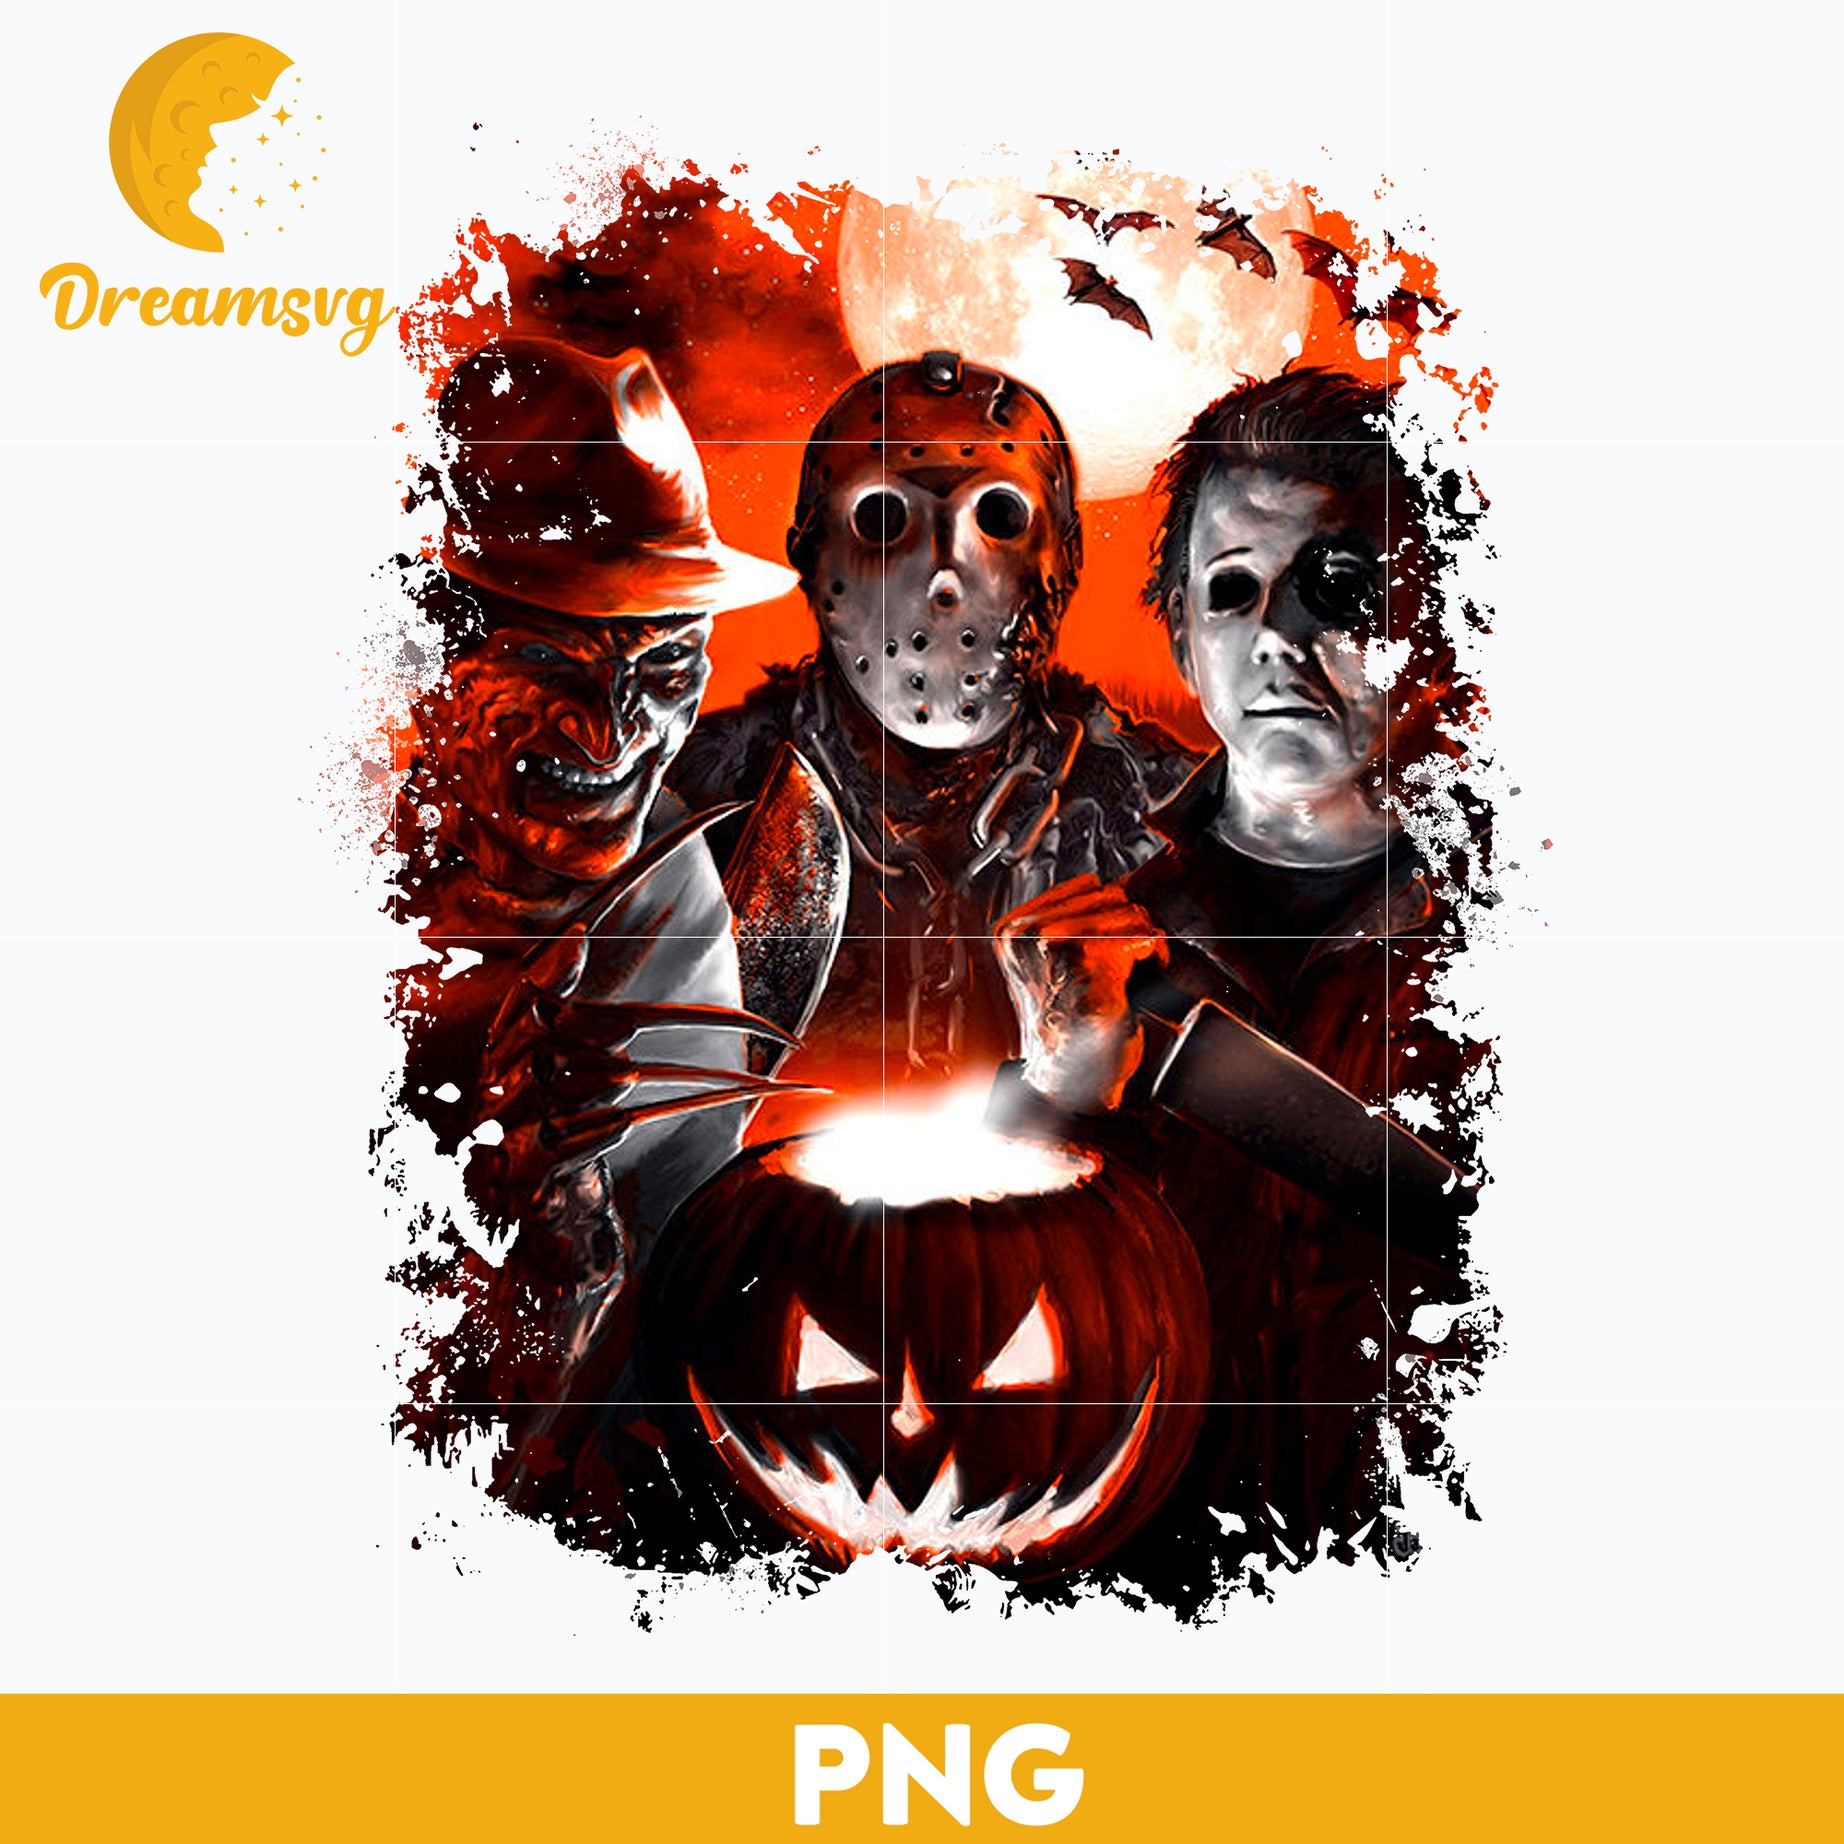 Horror movies PNG, Horror Characters PNG, Halloween Horror Movie Killers, Horror Movie Killers PNG, Digital files